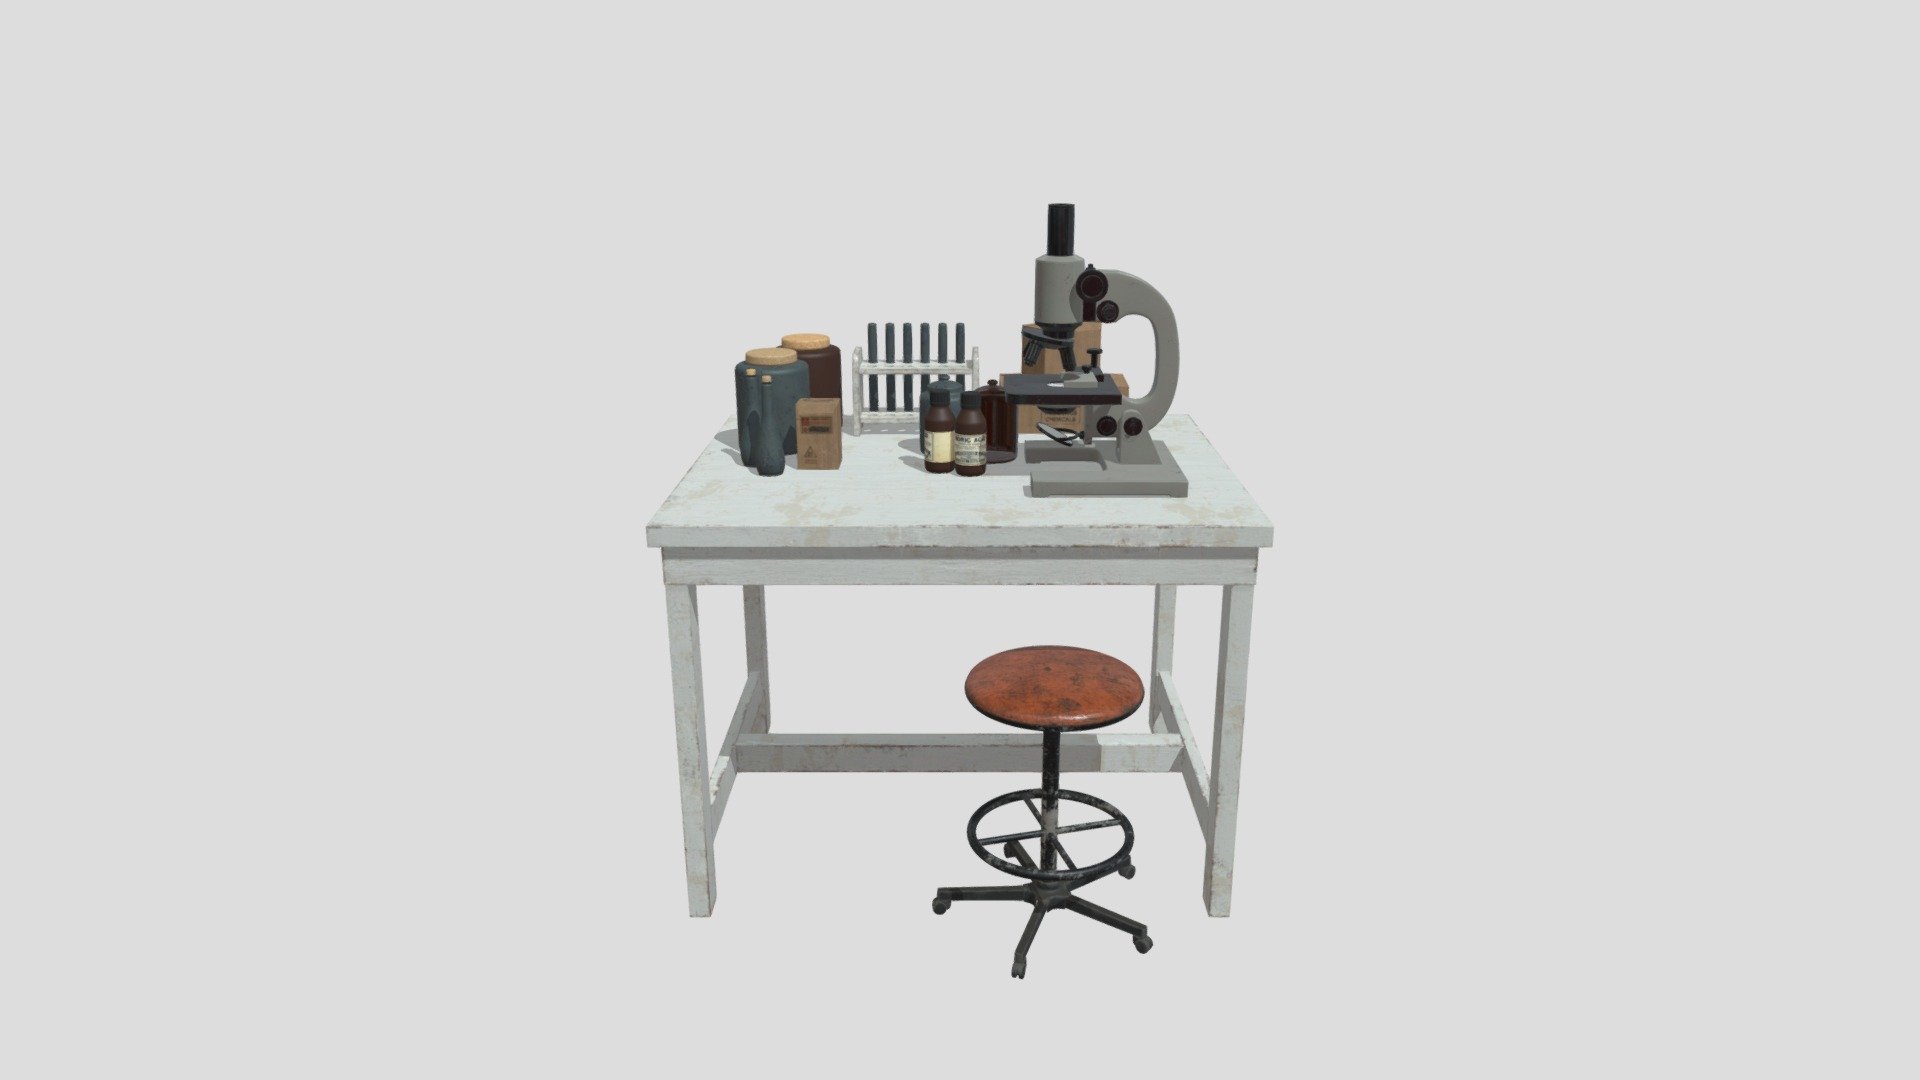 Highly detailed 3d model of lab props with all textures, shaders and materials. This 3d model is ready to use, just put it into your scene 3d model